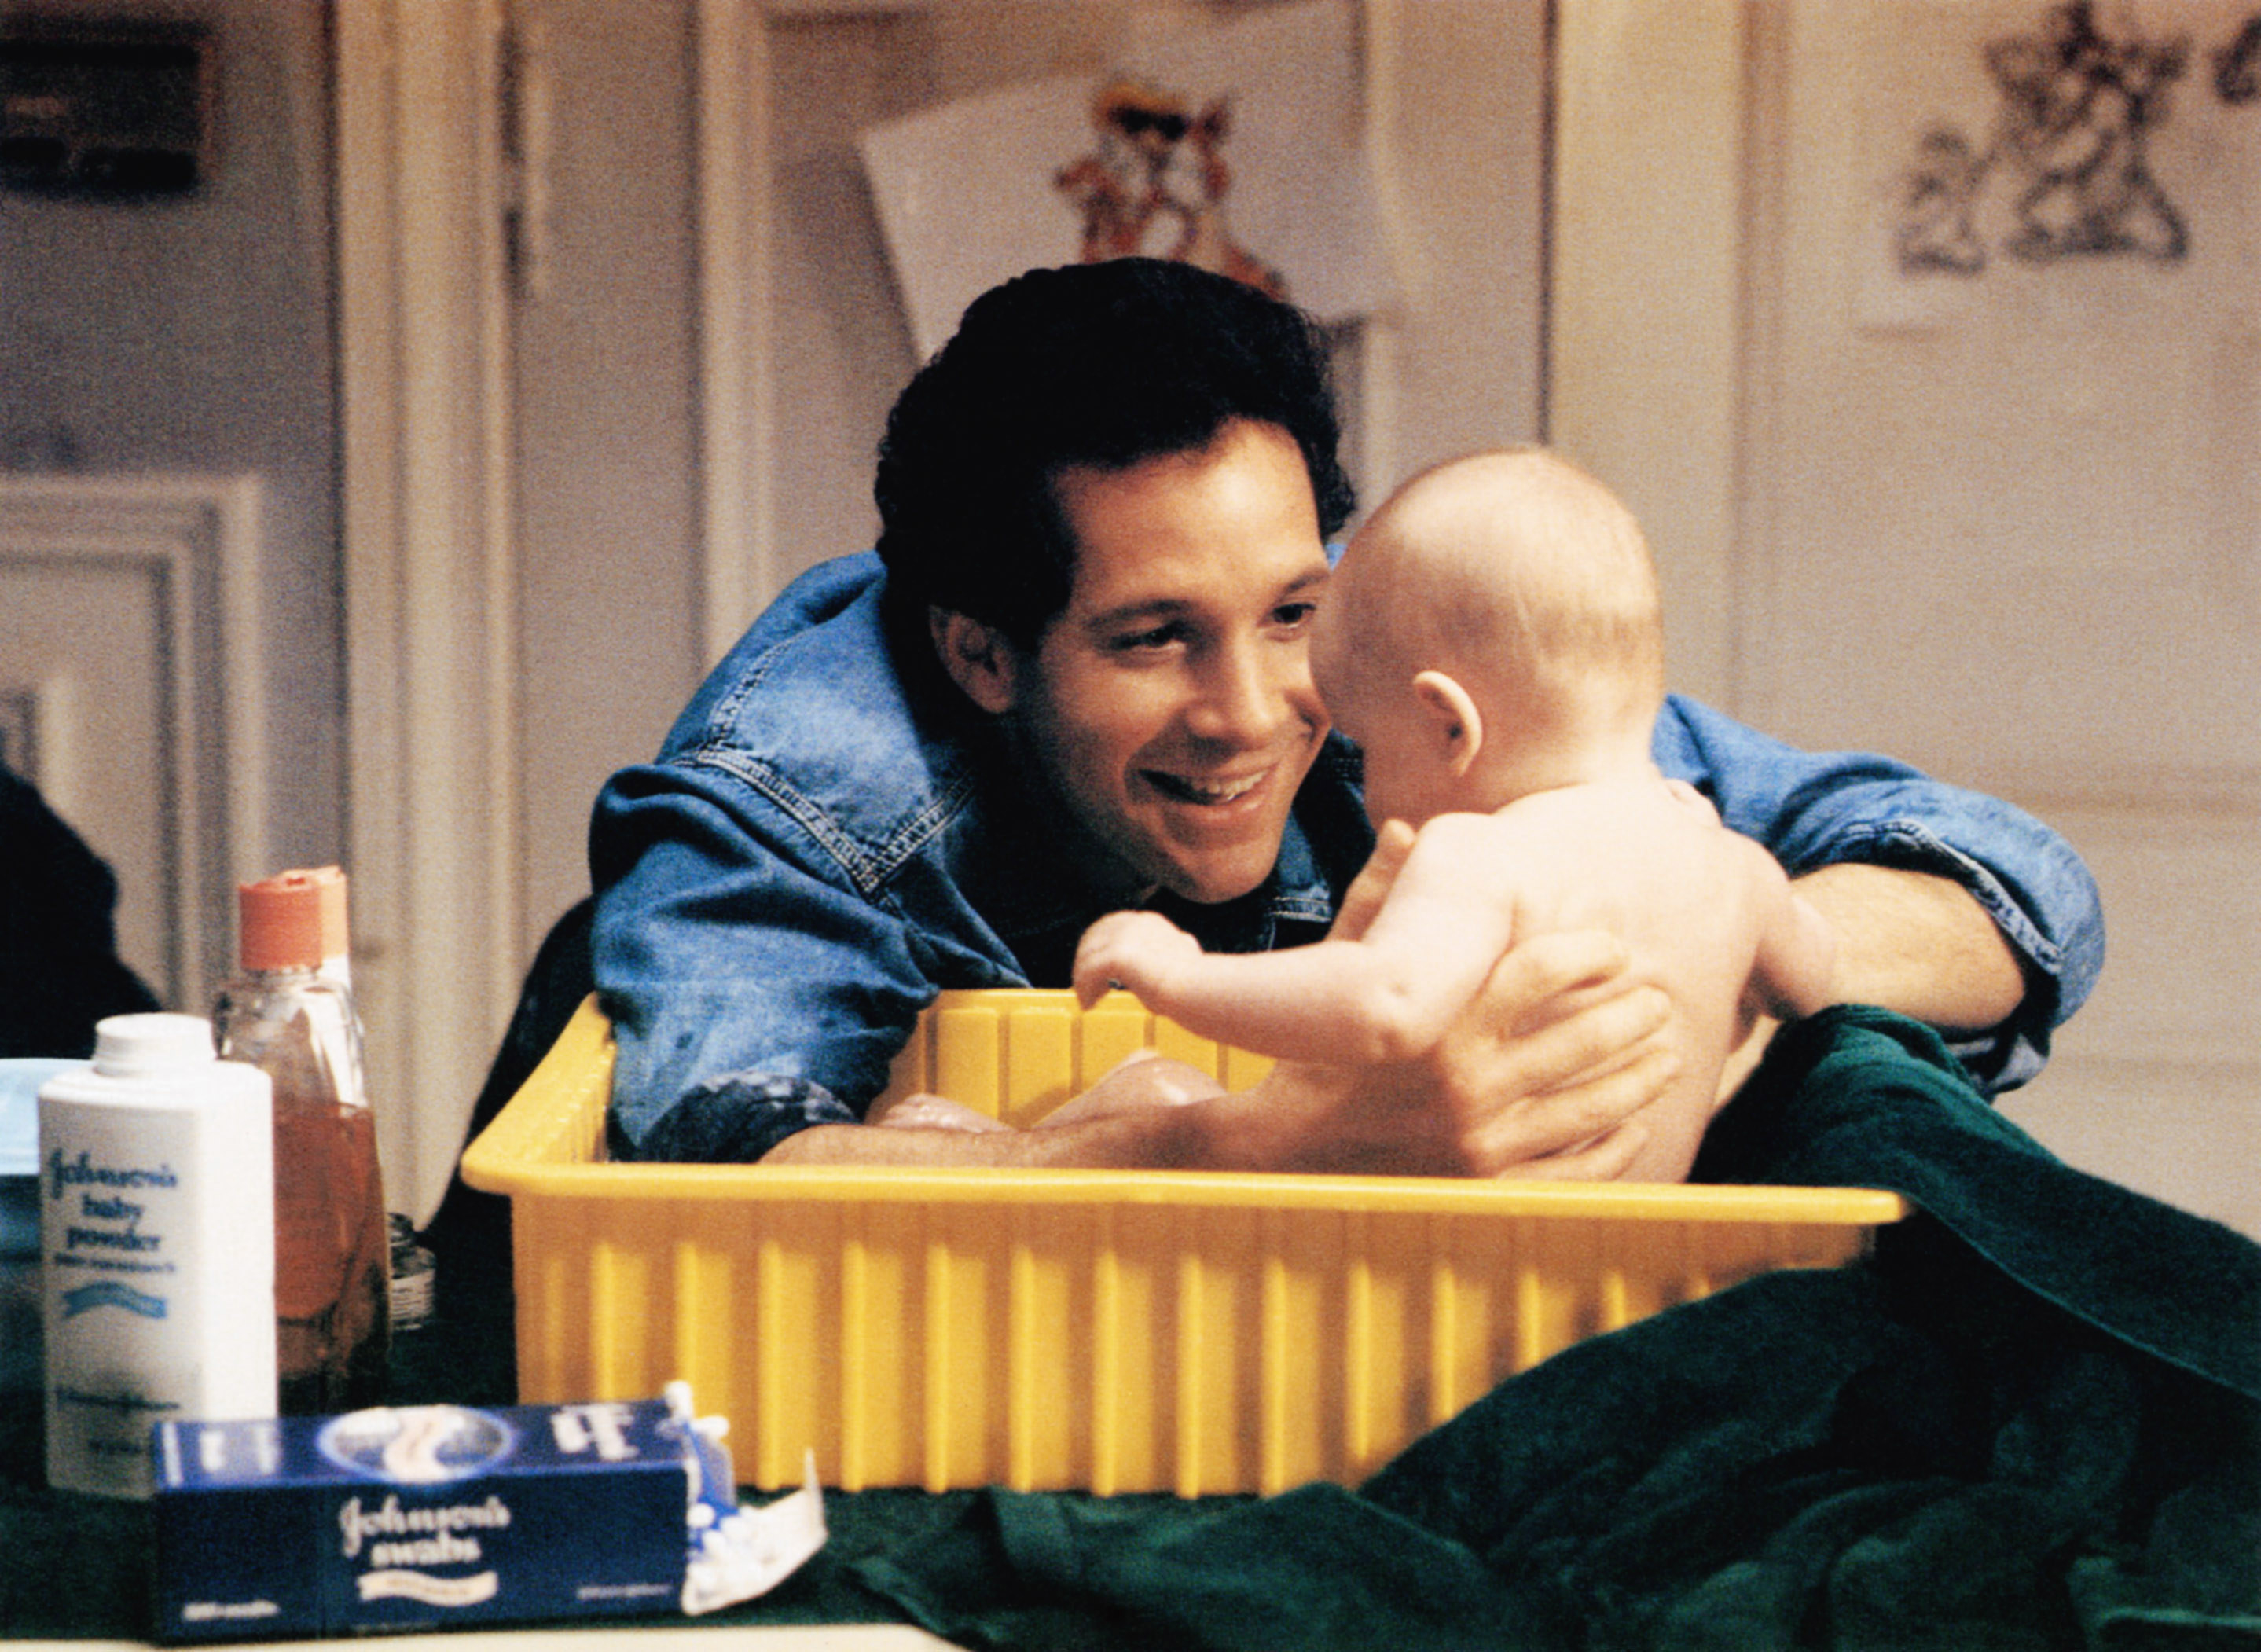 Steve Guttenberg holding a baby, played by twins Lisa and Michelle Blair, in a yellow bucket in the movie Three Men and a Baby